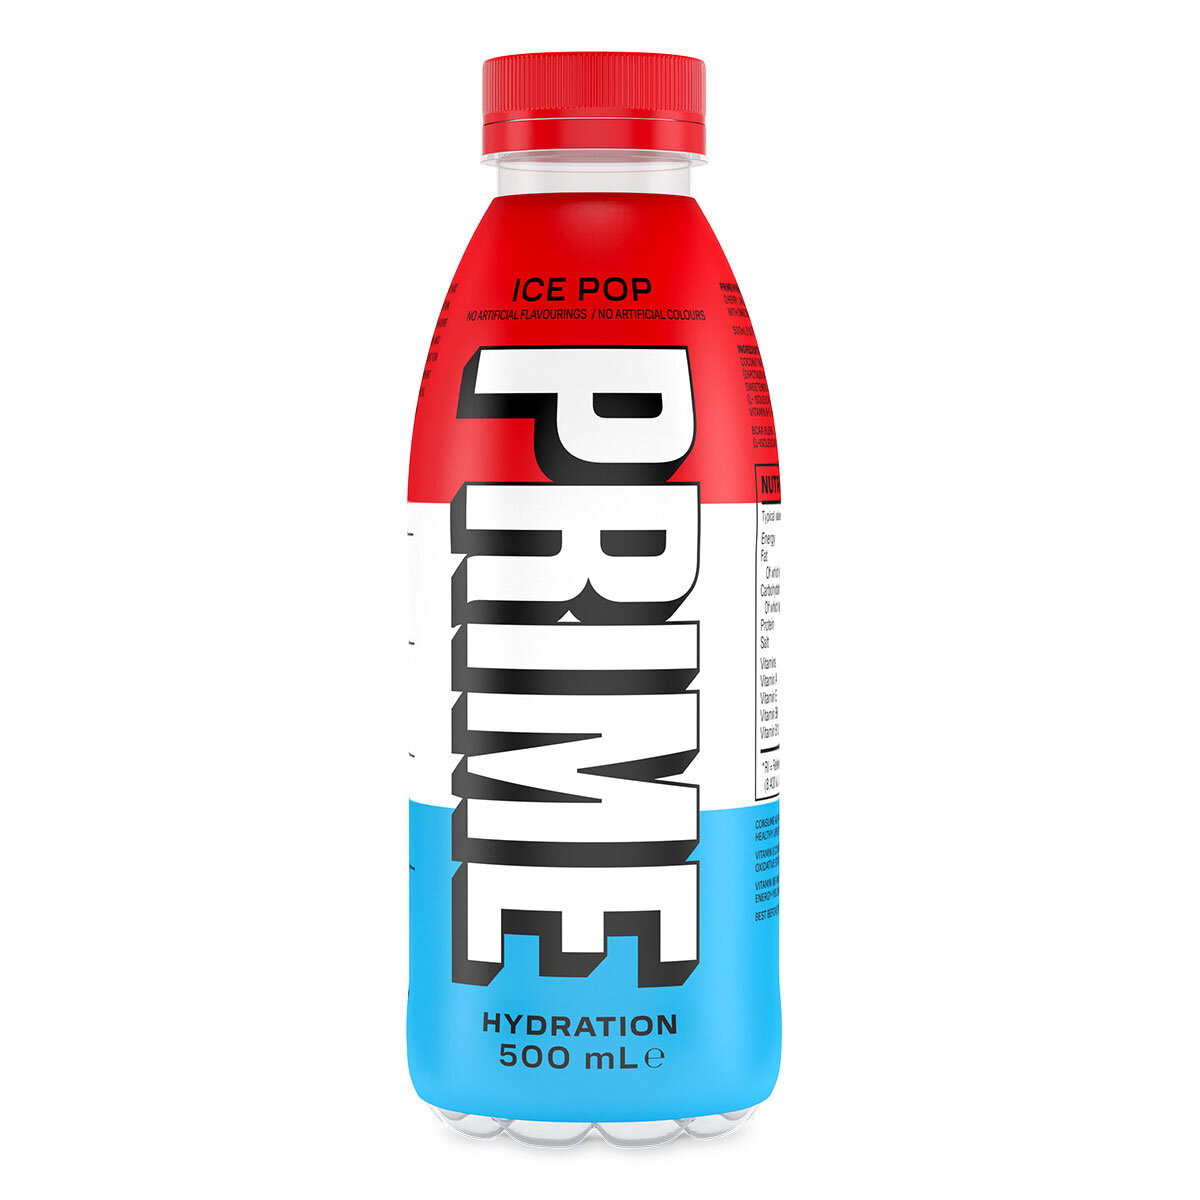 DrinkPrime on X: PRIME Hydration+ Sticks Variety Pack exclusively  available @Costco💧  / X